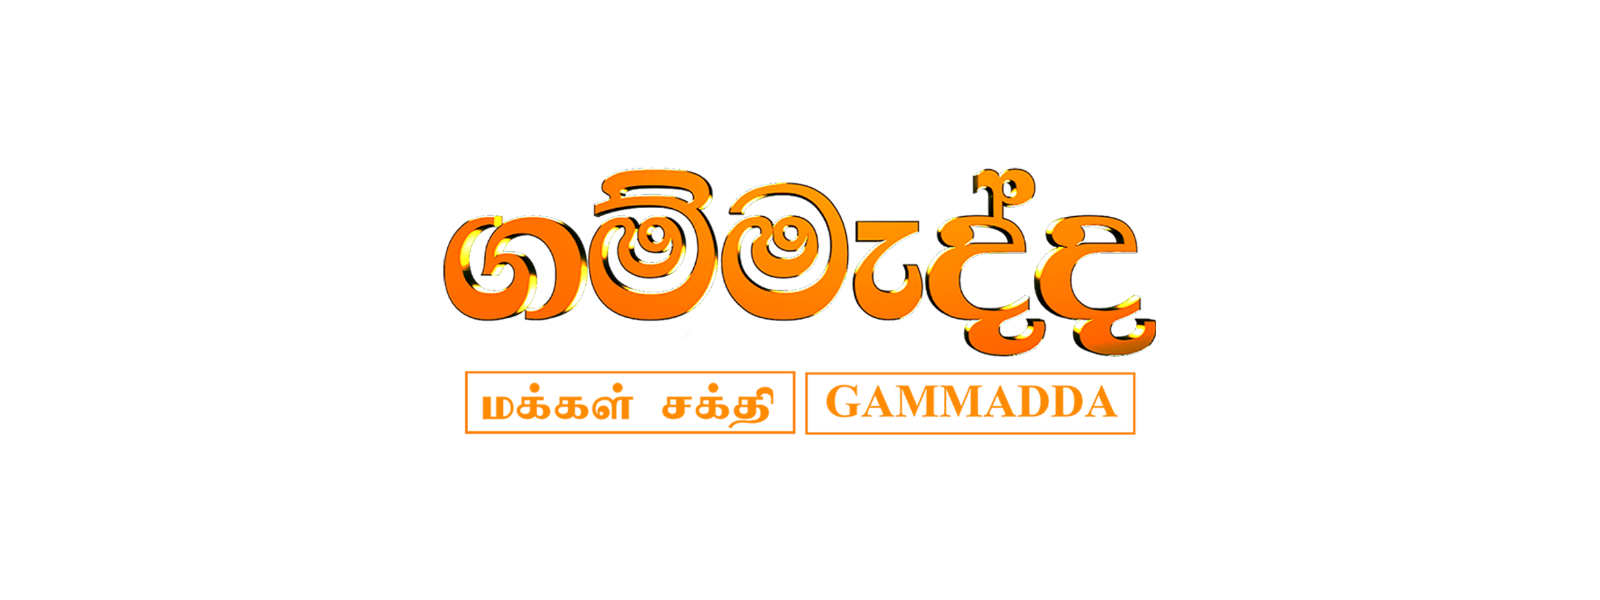 Gammadda phase four commences today